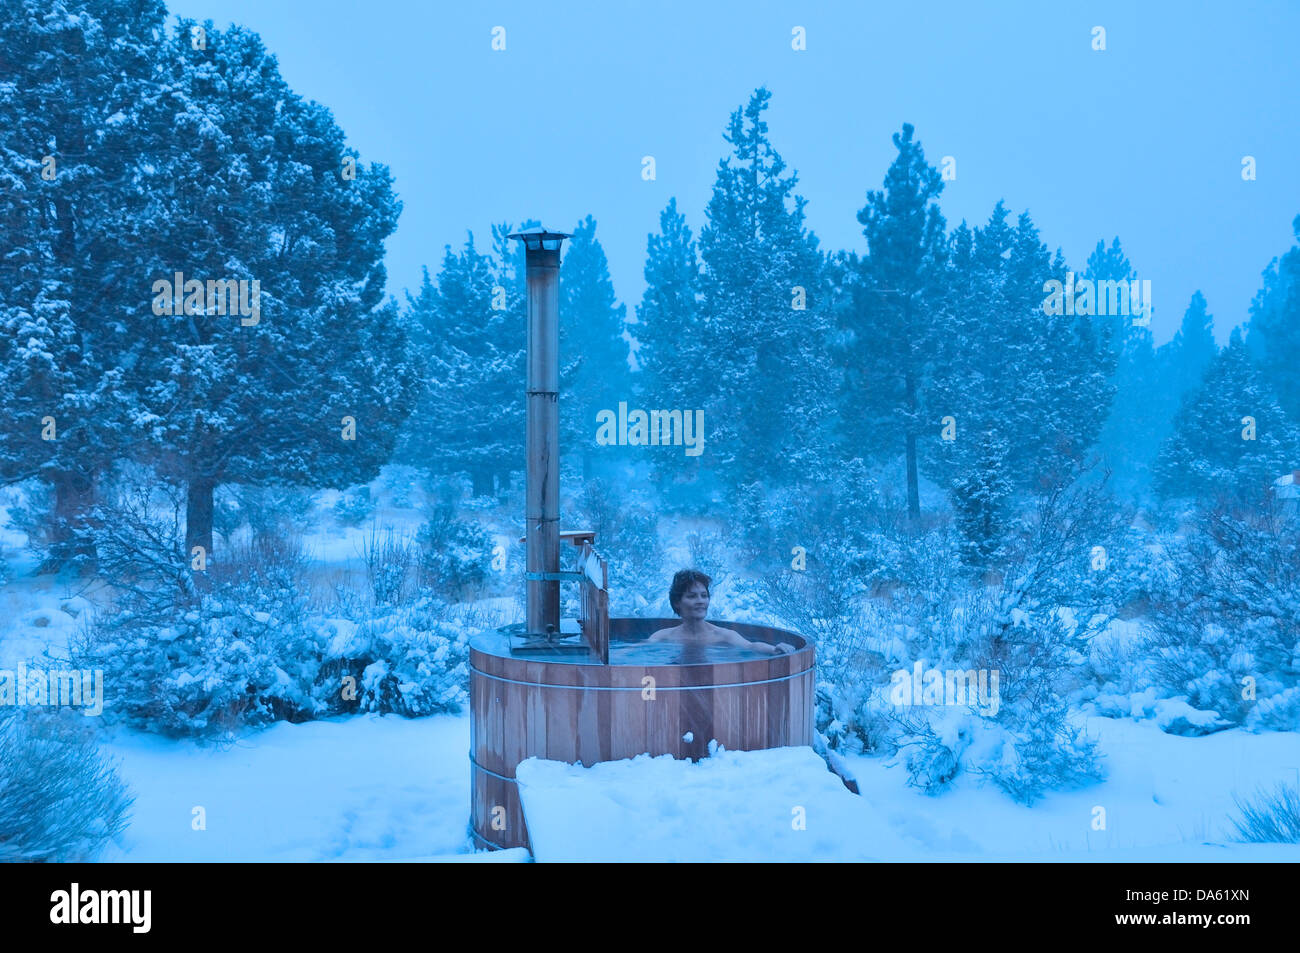 Woman, wood fired, hot tub, snow, winter, snowing, Central Oregon, USA, United States, America, Oregon, relax, wellness Stock Photo